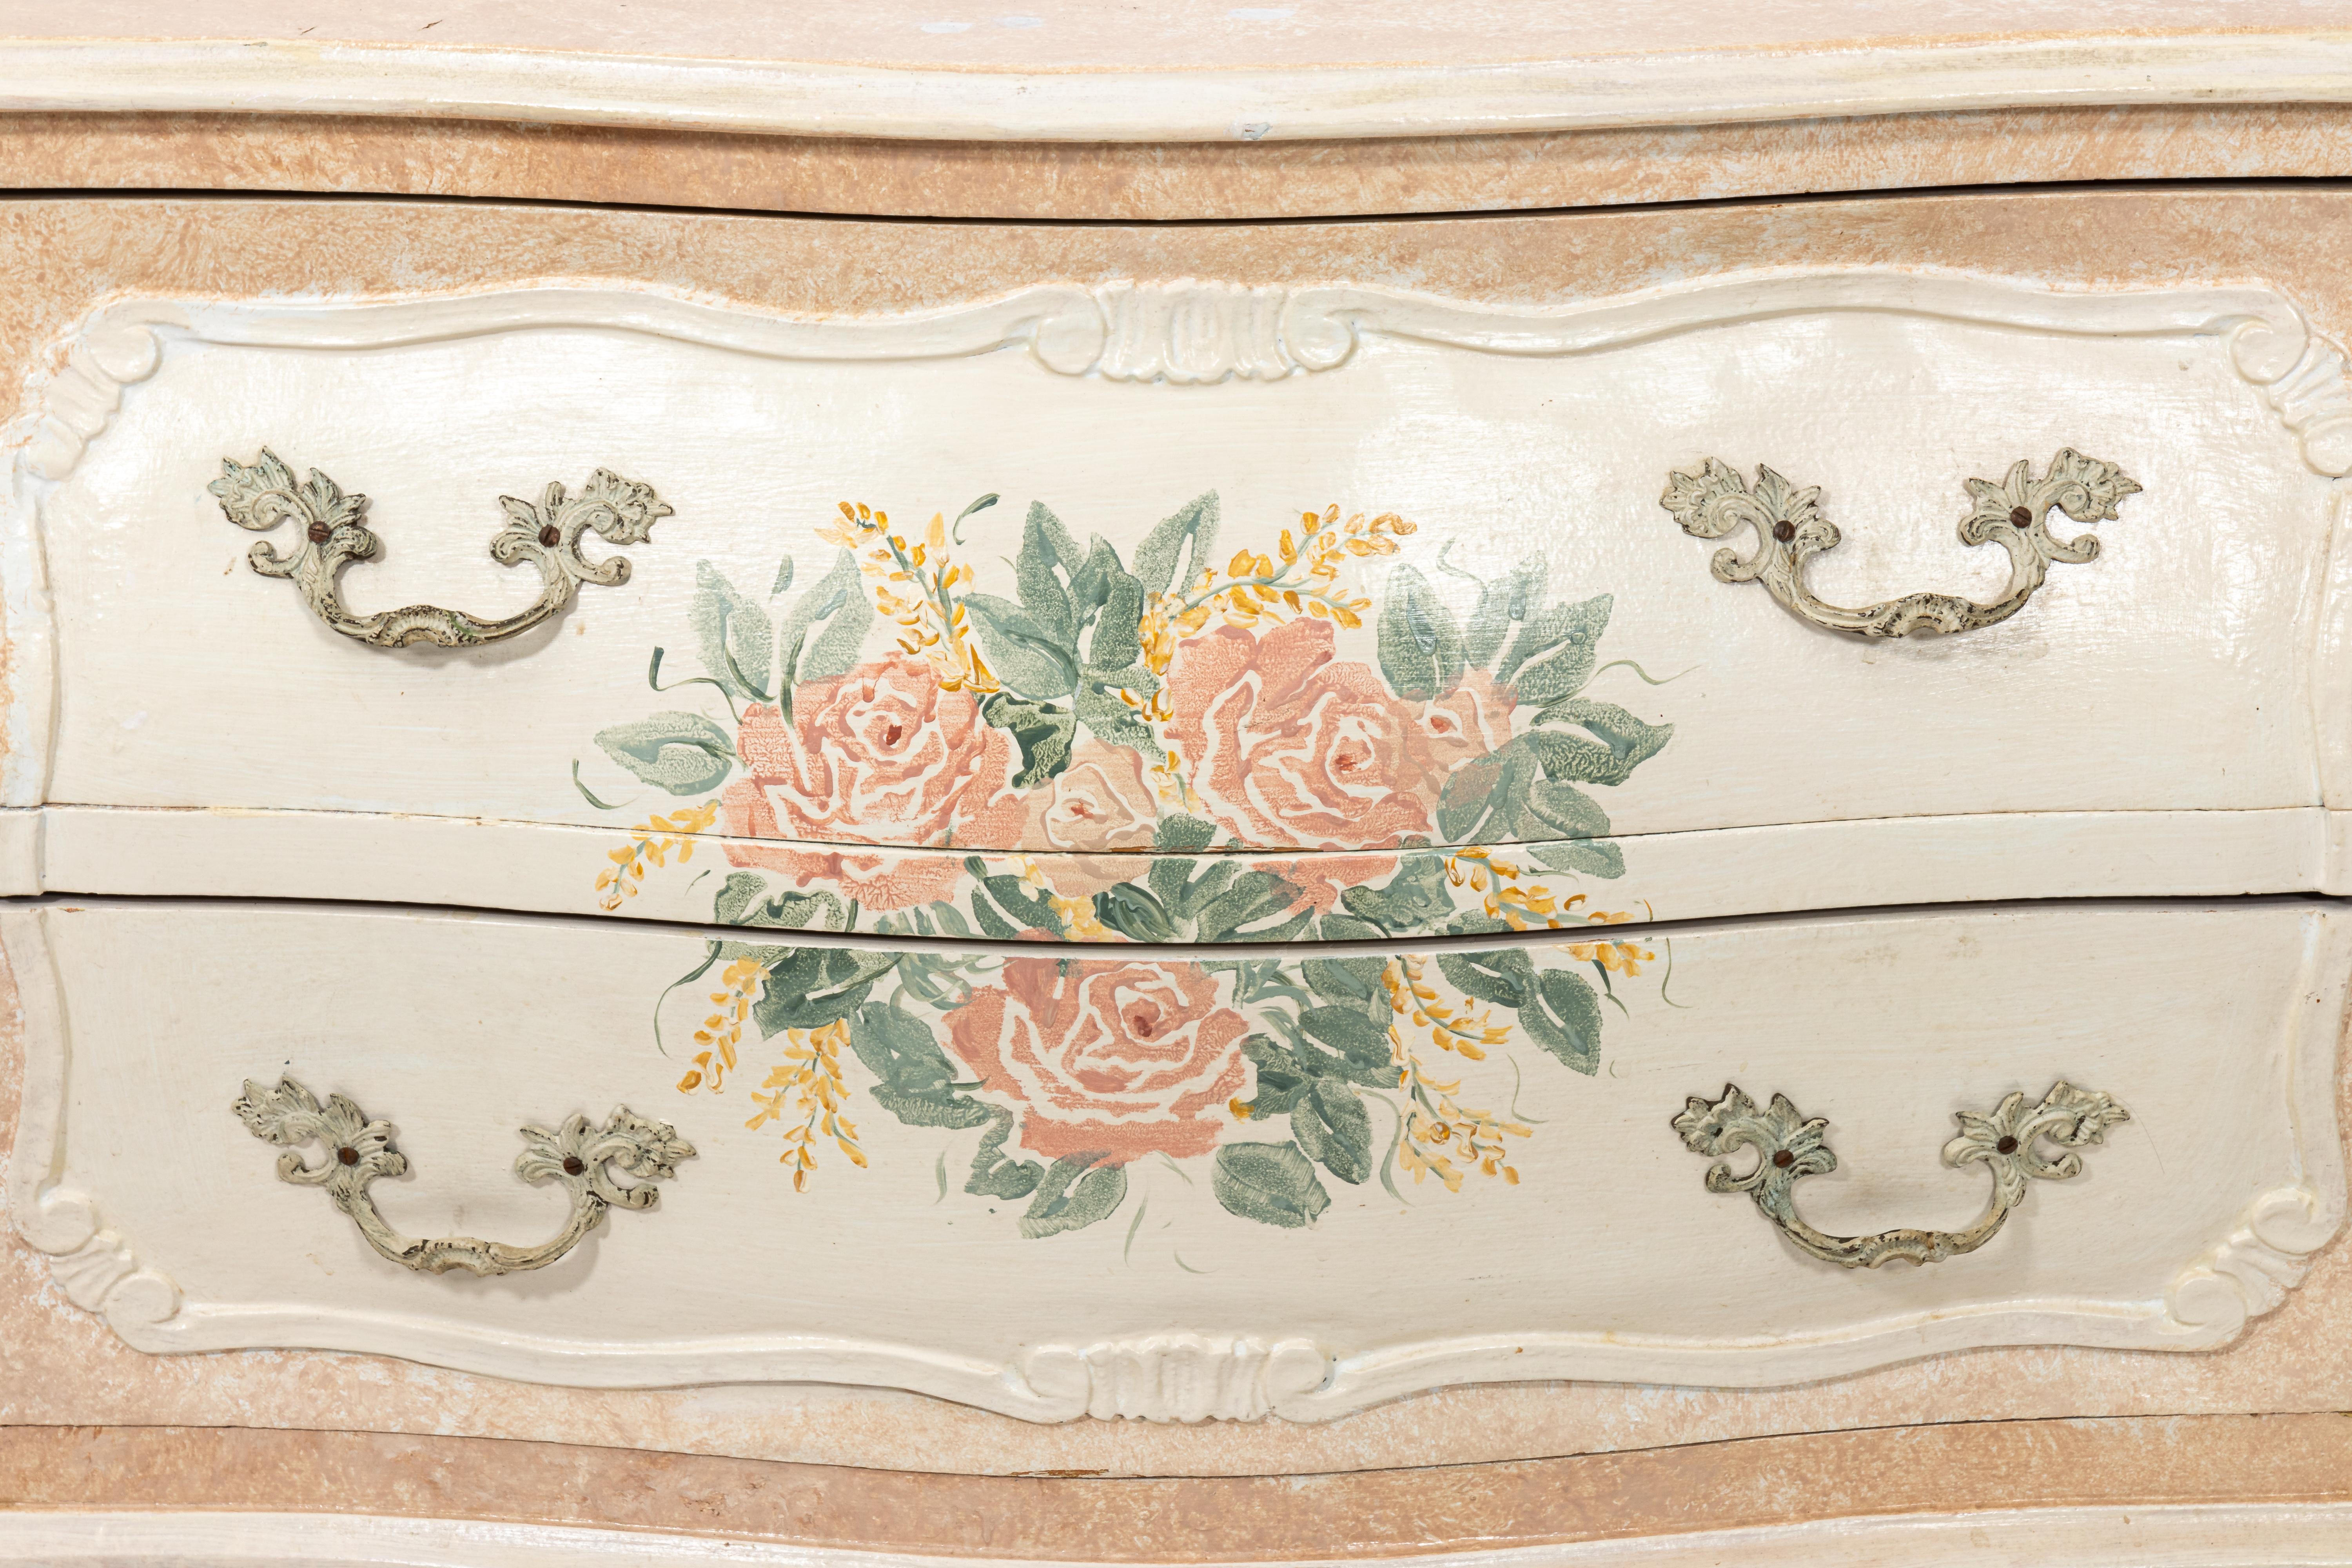 Italian two-drawer commode or end table with painted leaf detail on drawer fronts. Some paint loss due to age and use.